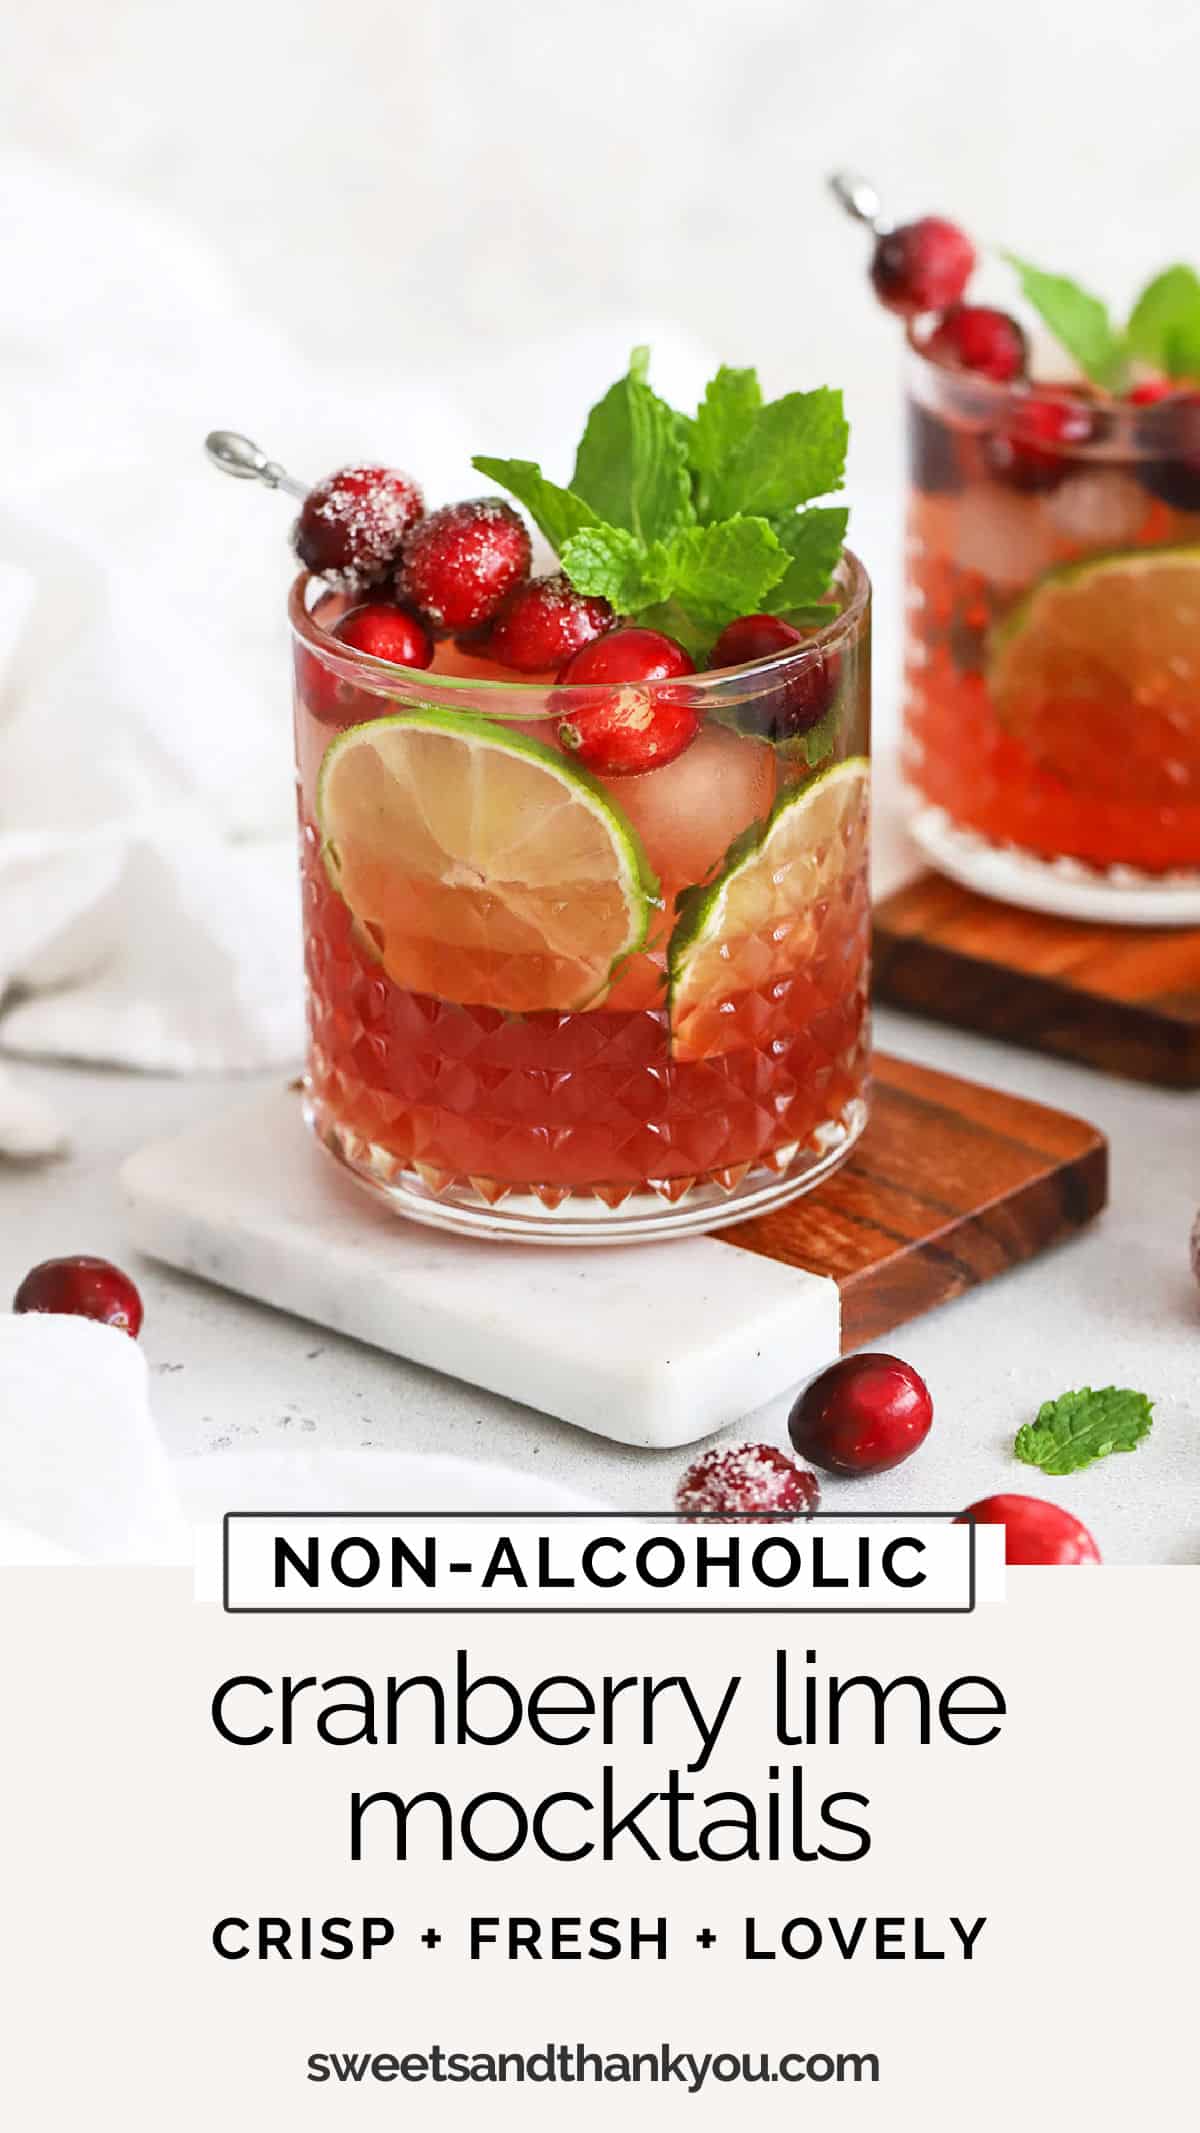 Cranberry Lime Mocktail - This non-alcoholic cranberry mocktail recipe is an easy holiday drink everyone can enjoy! // holiday mocktail recipe // christmas mocktail recipe / thanksgiving mocktail recipe / virgin cranberry mocktail / cranberry mocktail / winter mocktail recipe / red mocktail / red and green mocktail / mocktail with mint simple syrup / cranberry mint drink / non alcoholic cranberry lime cocktail / non alcoholic cranberry cocktail